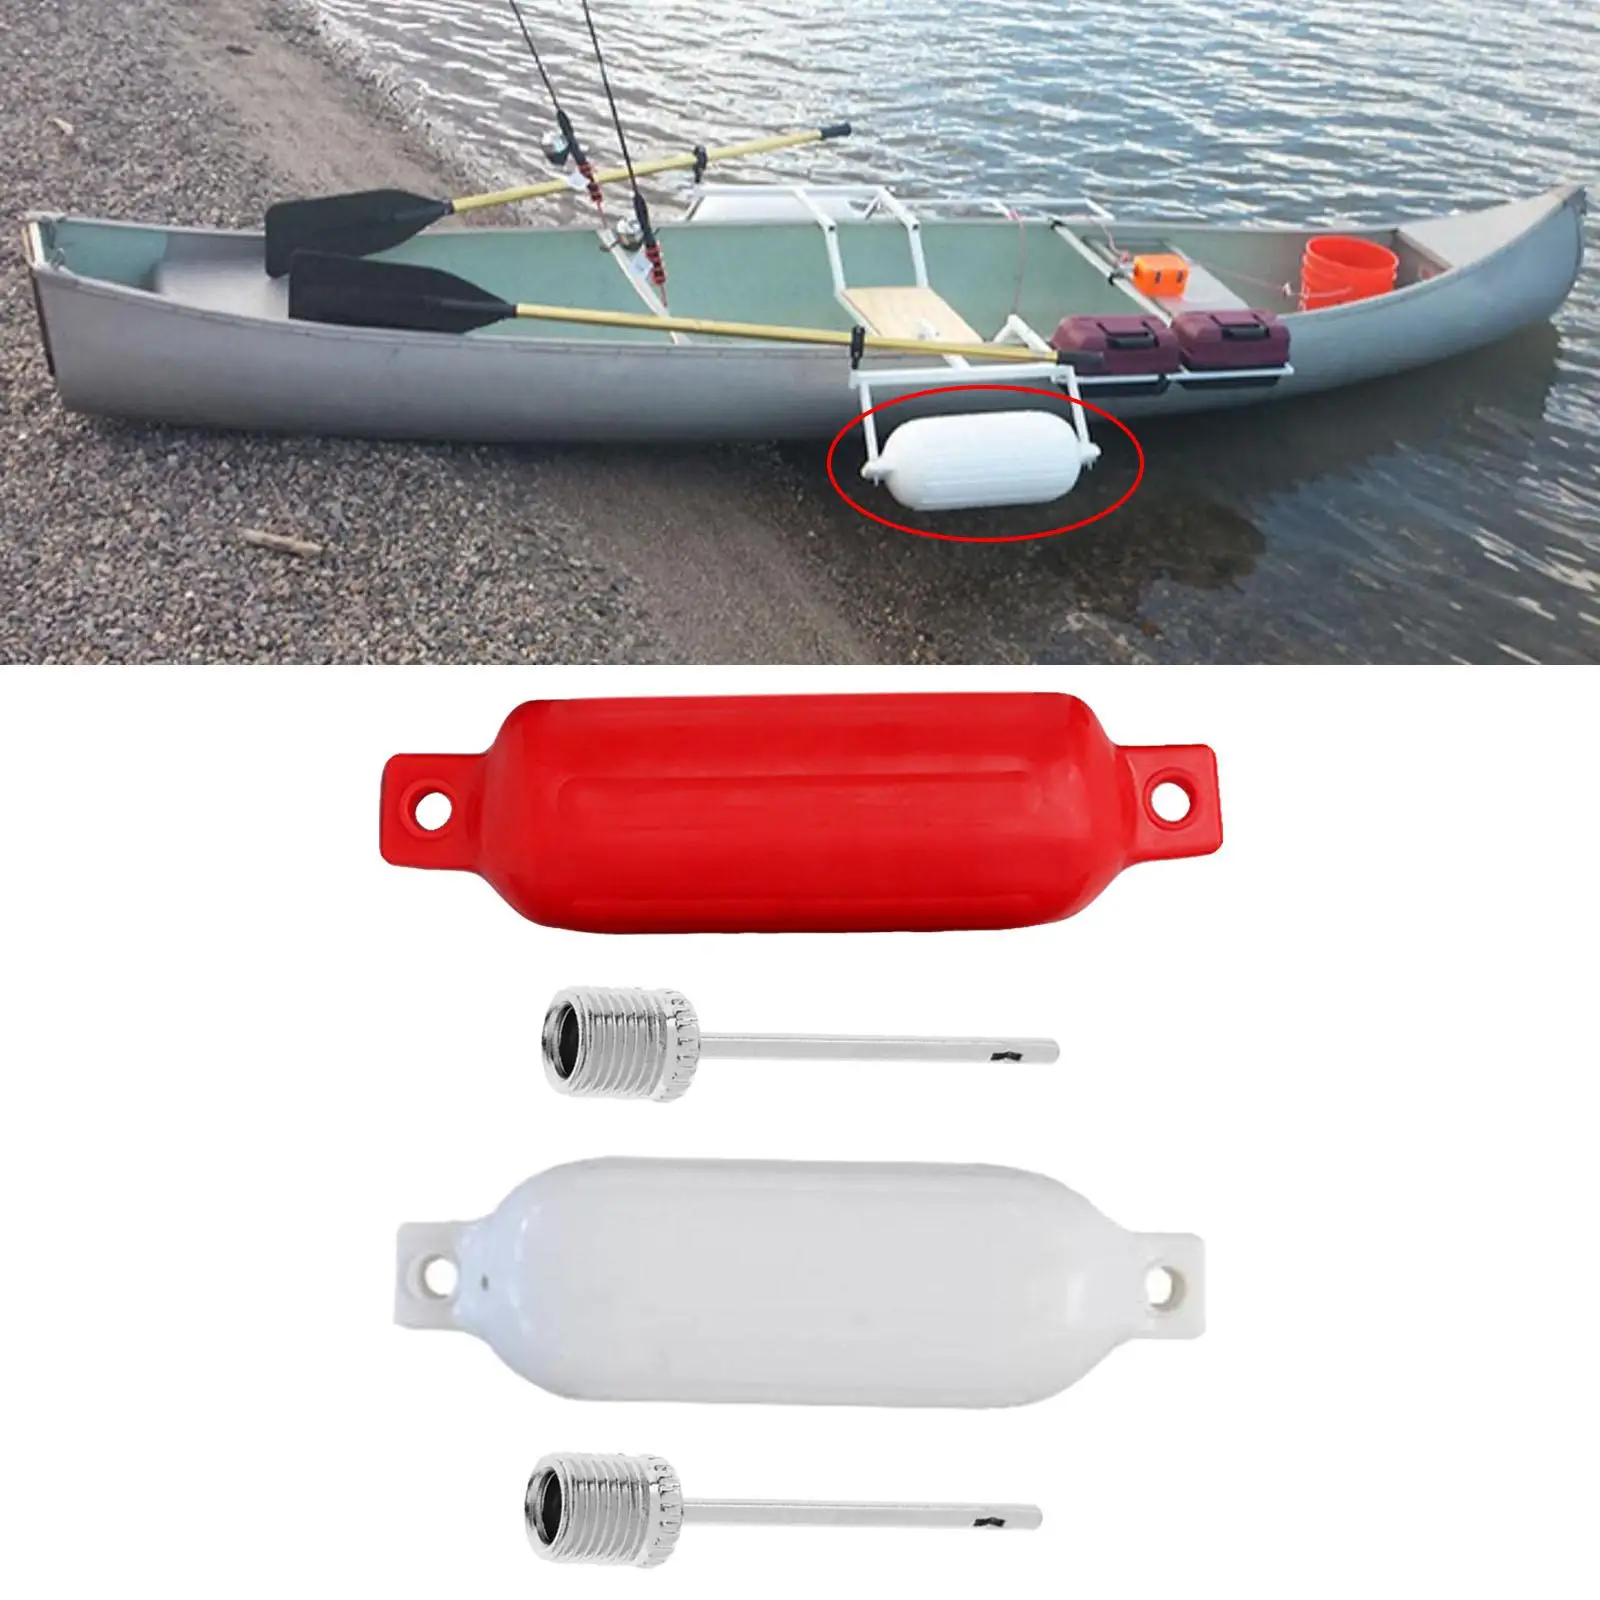 Marine Boat Fender Protection Boat Accessories Ribbed Inflatable Boat Bumper for Sailboats Sport Boats Fishing Boats